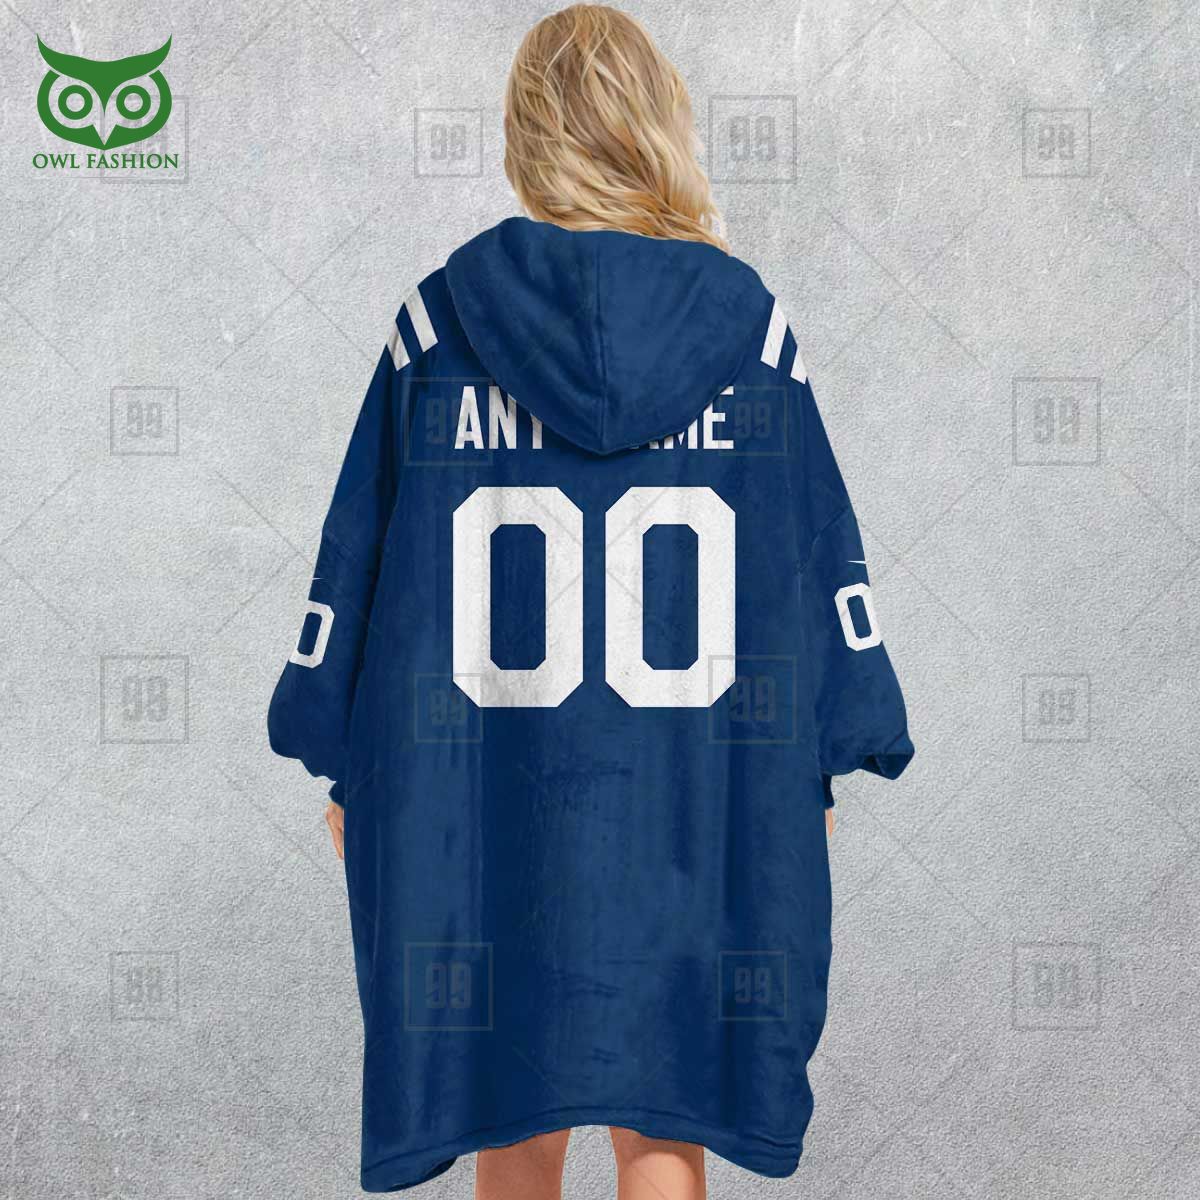 indianapolis colts american league nfl customized snuggie hoodie 3 ay3JK